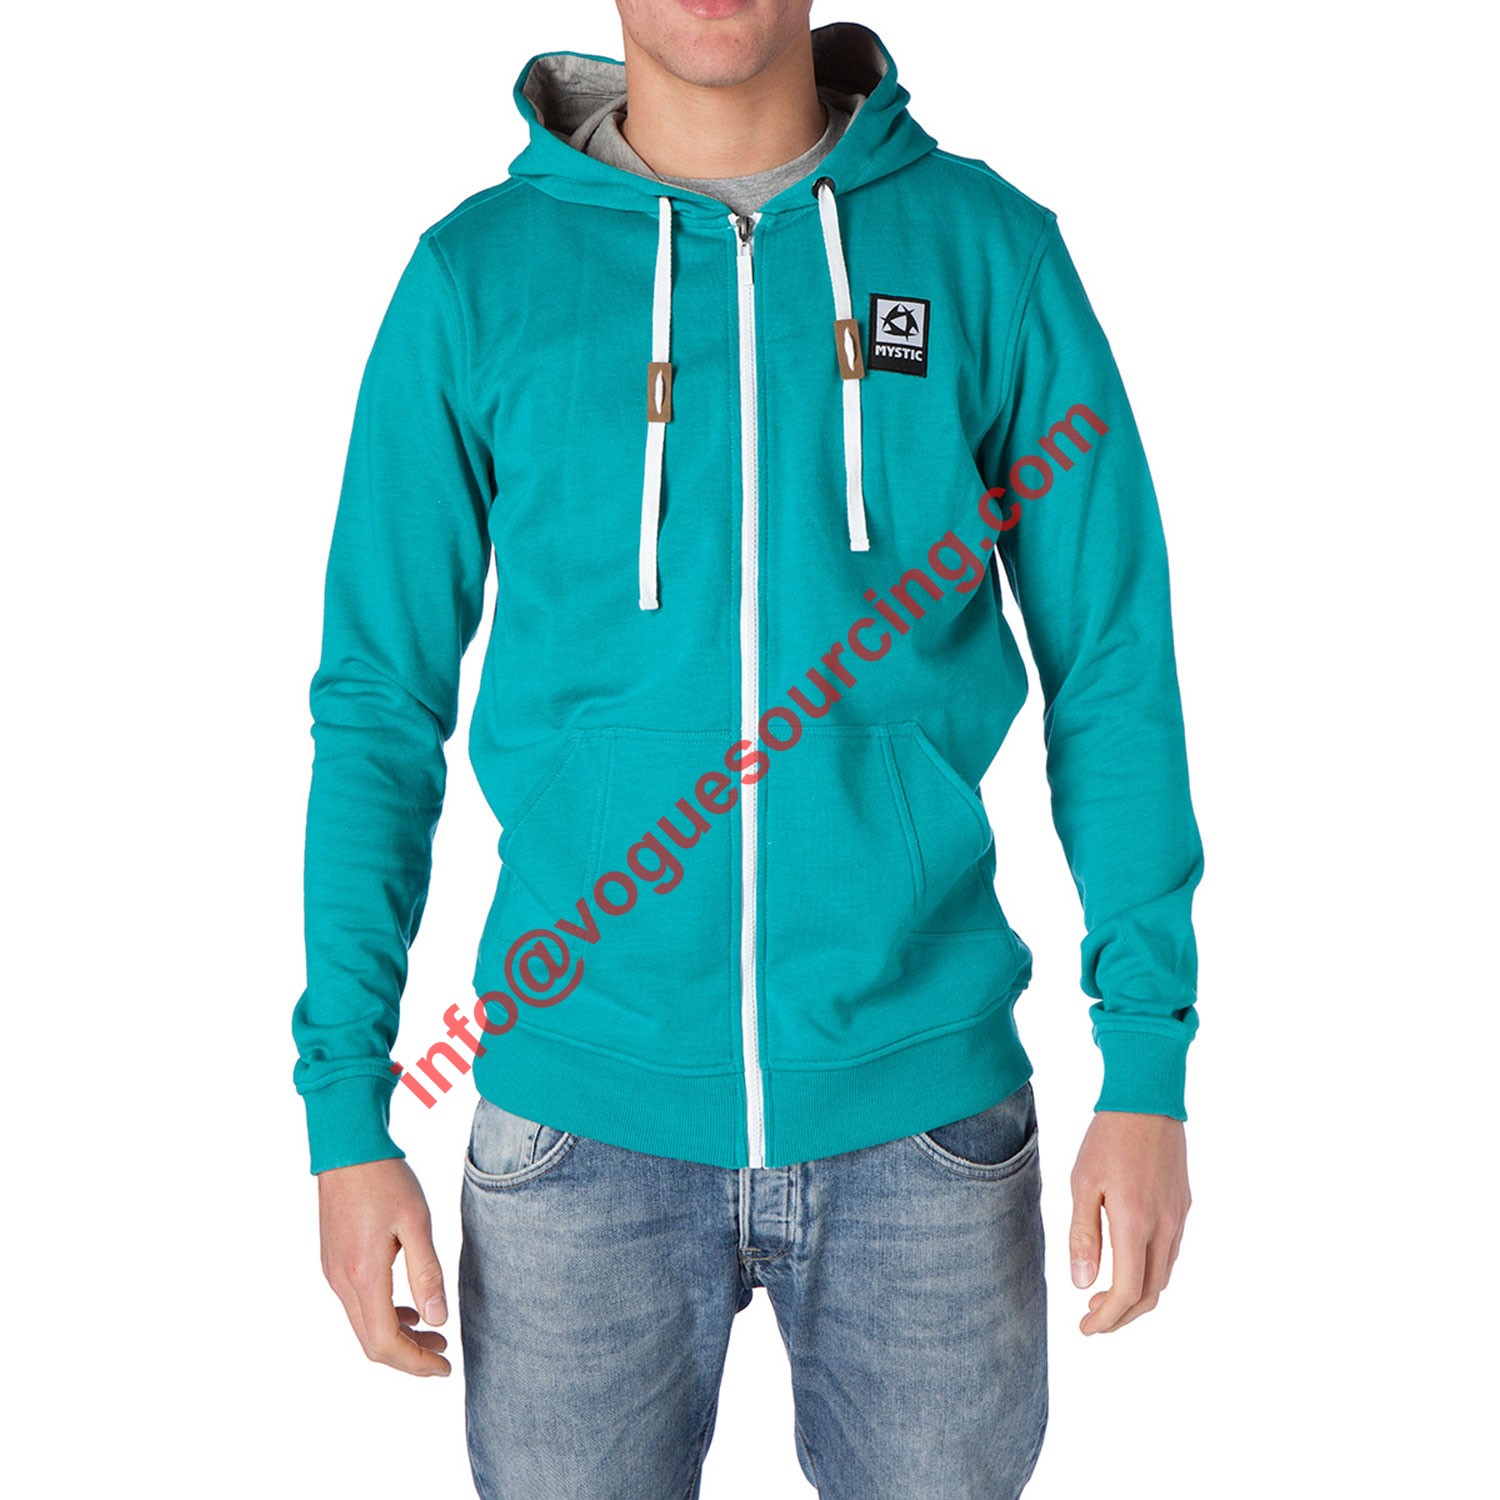 youth-hoodies-manufacturers-suppliers-exporters-wholesalers-voguesourcing-tirupur-india-uk-europe-usa-australia-uae-canada